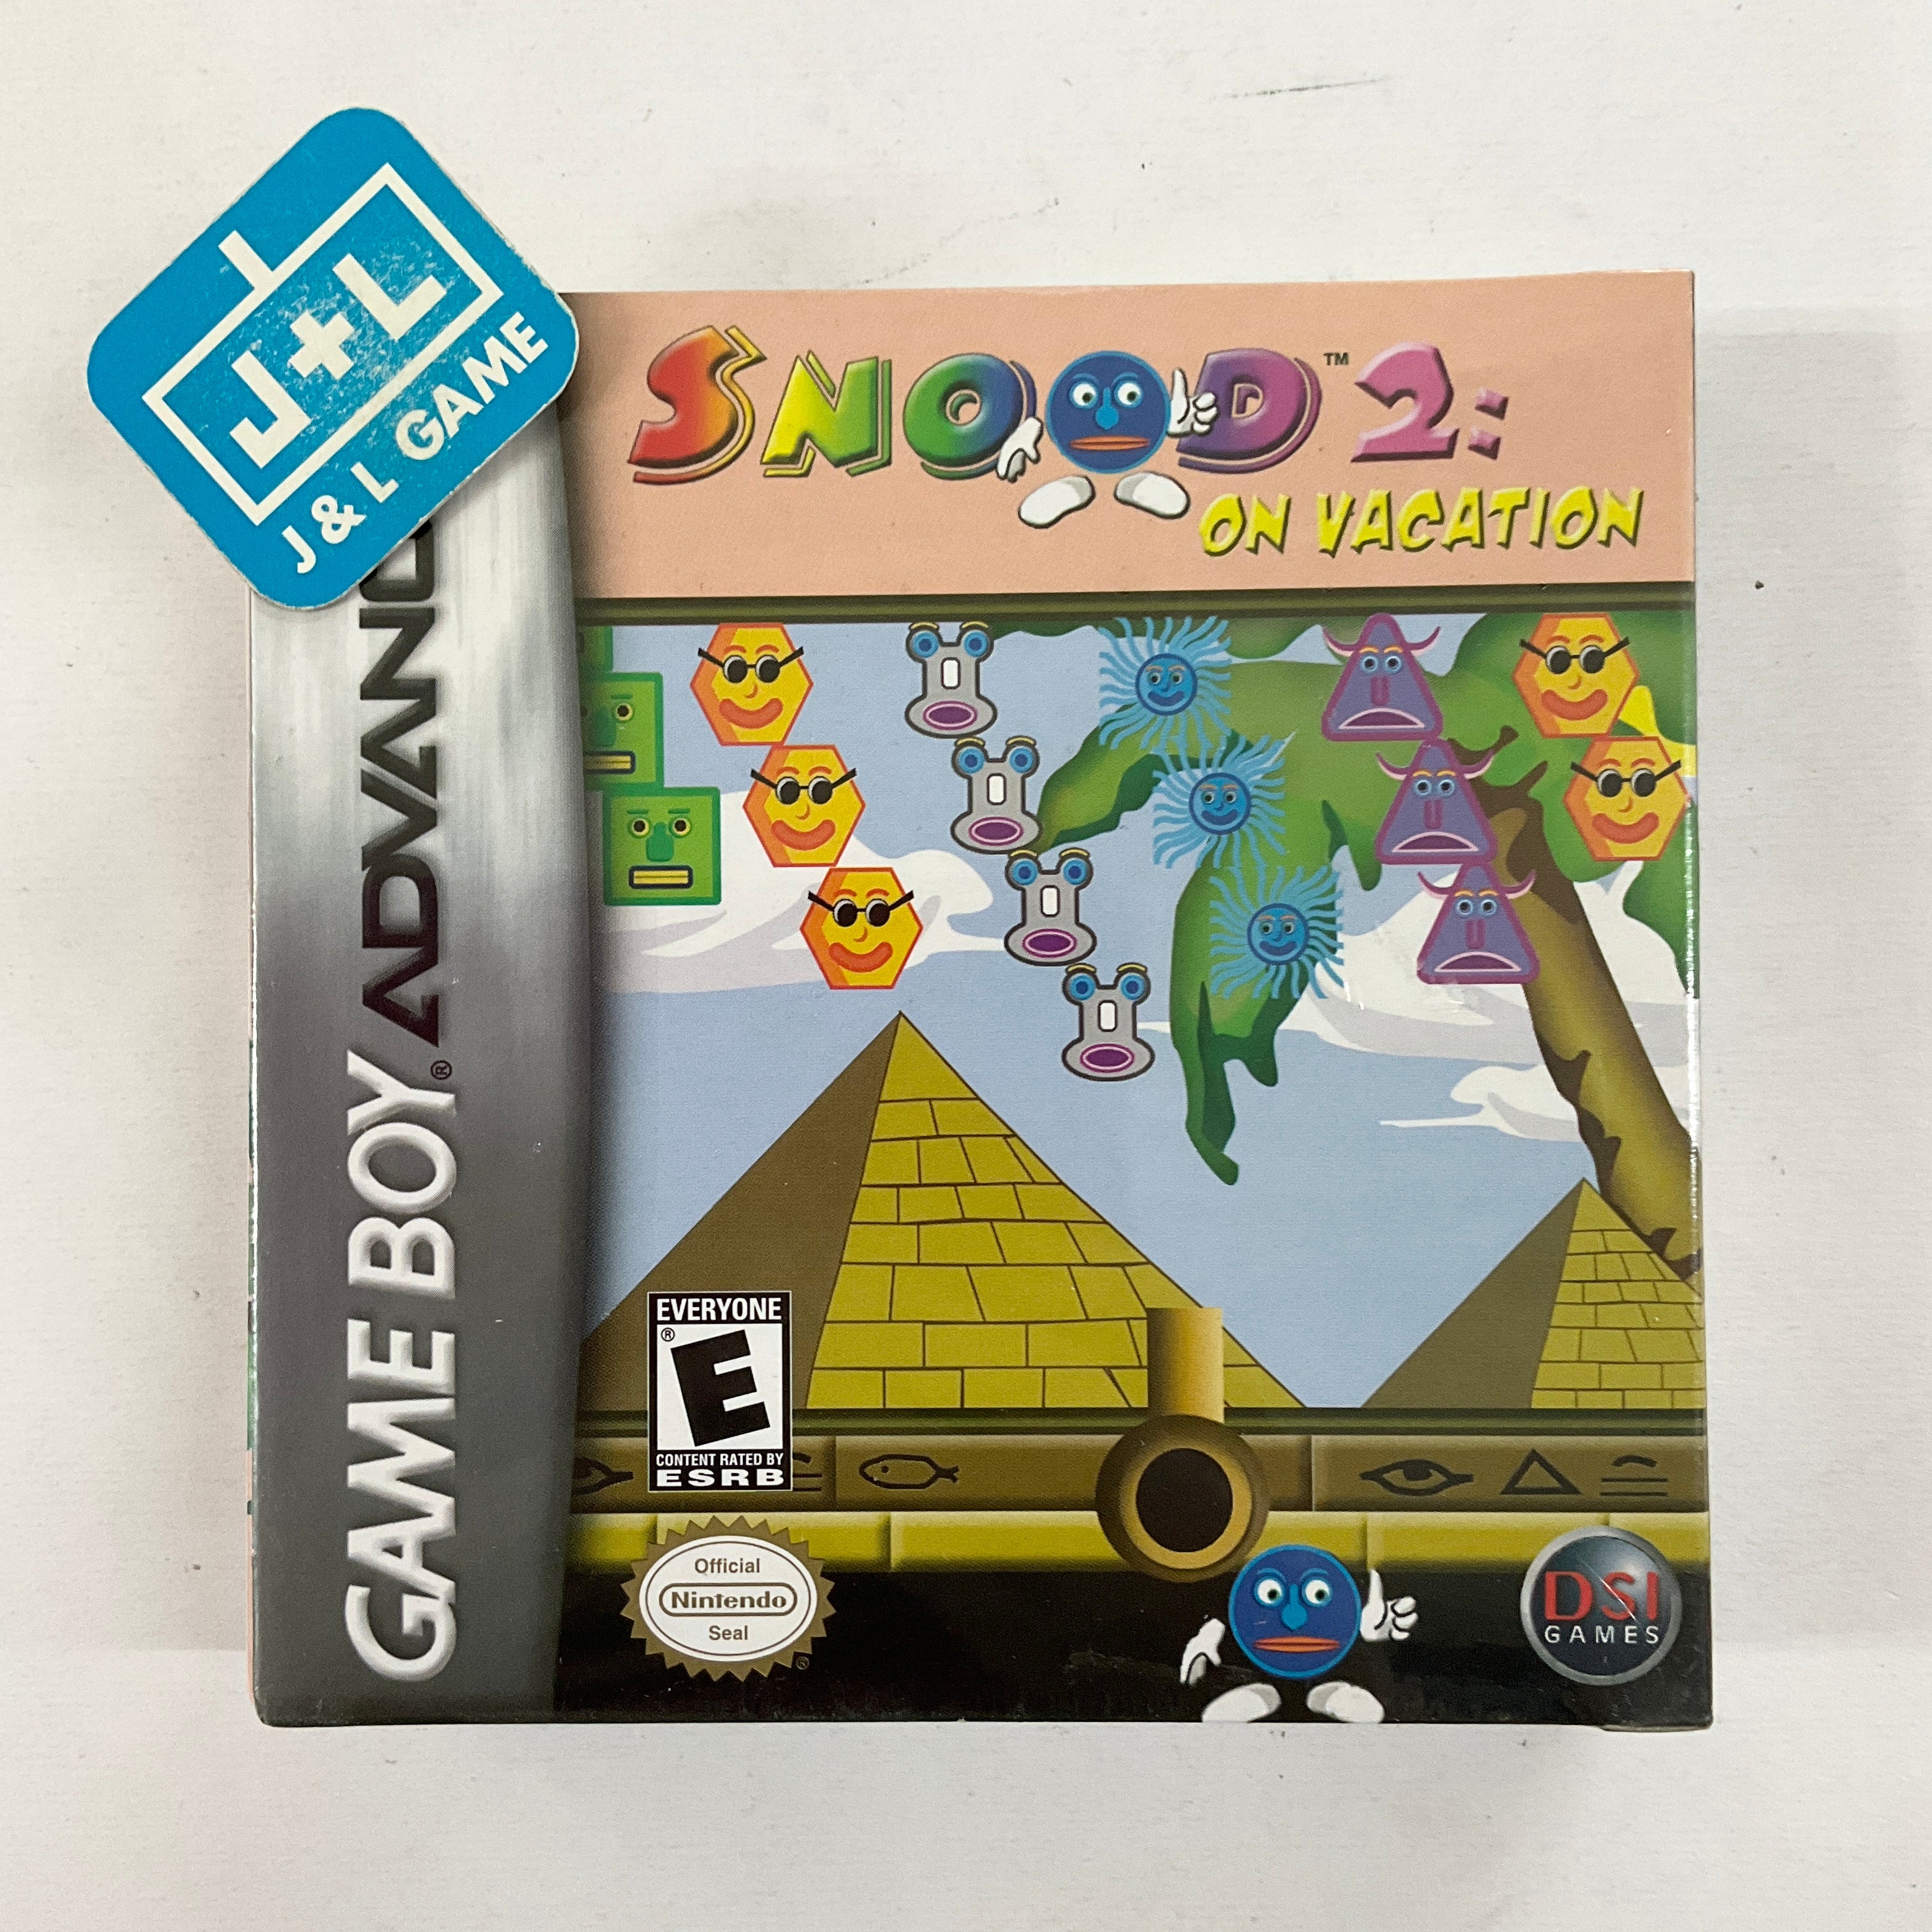 Snood 2: On Vacation - (GBA) Game Boy Advance Video Games Destination Software   